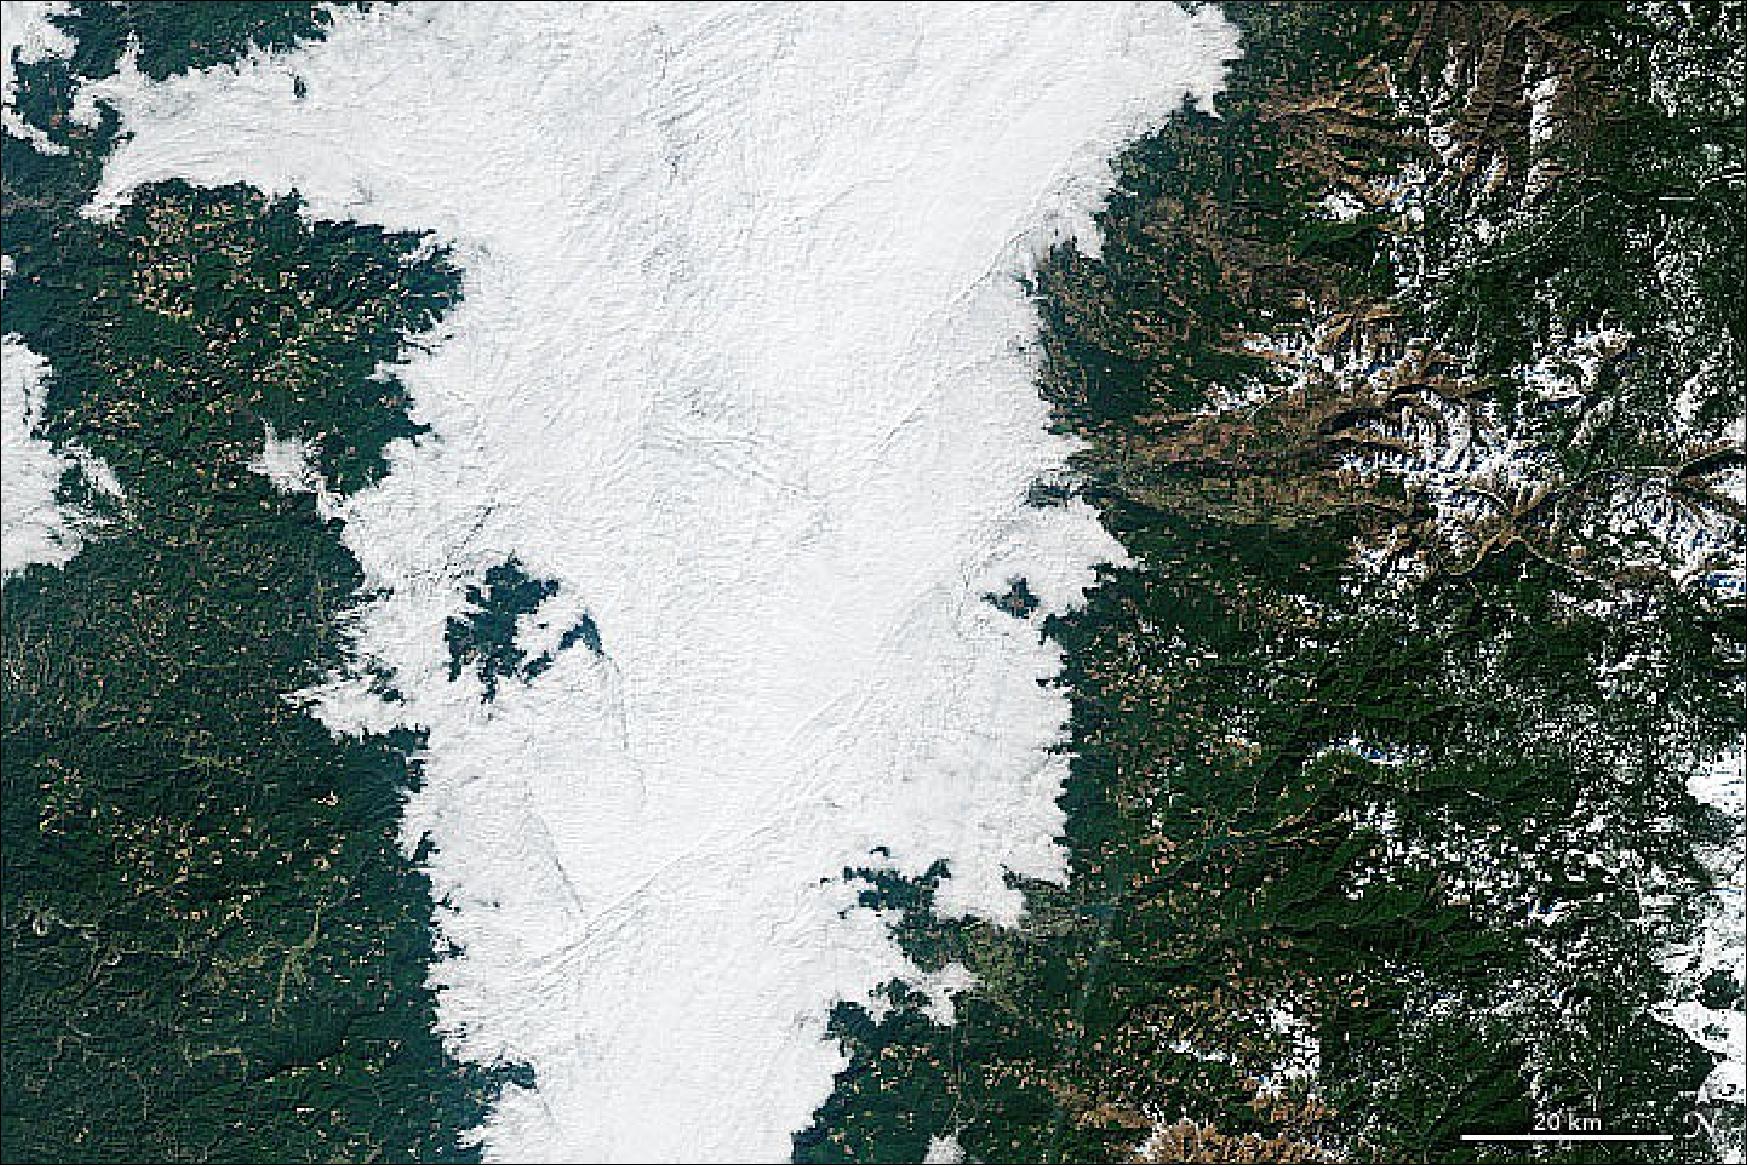 Figure 41: On February 10, 2022, the Operational Land Imager-2 (OLI-2) on Landsat-9 acquired this natural image of fog in the Willamette Valley (image credit: NASA Earth Observatory images by Joshua Stevens, using Landsat data from the U.S. Geological Survey. Story by Michael Carlowicz and Adam Voiland)